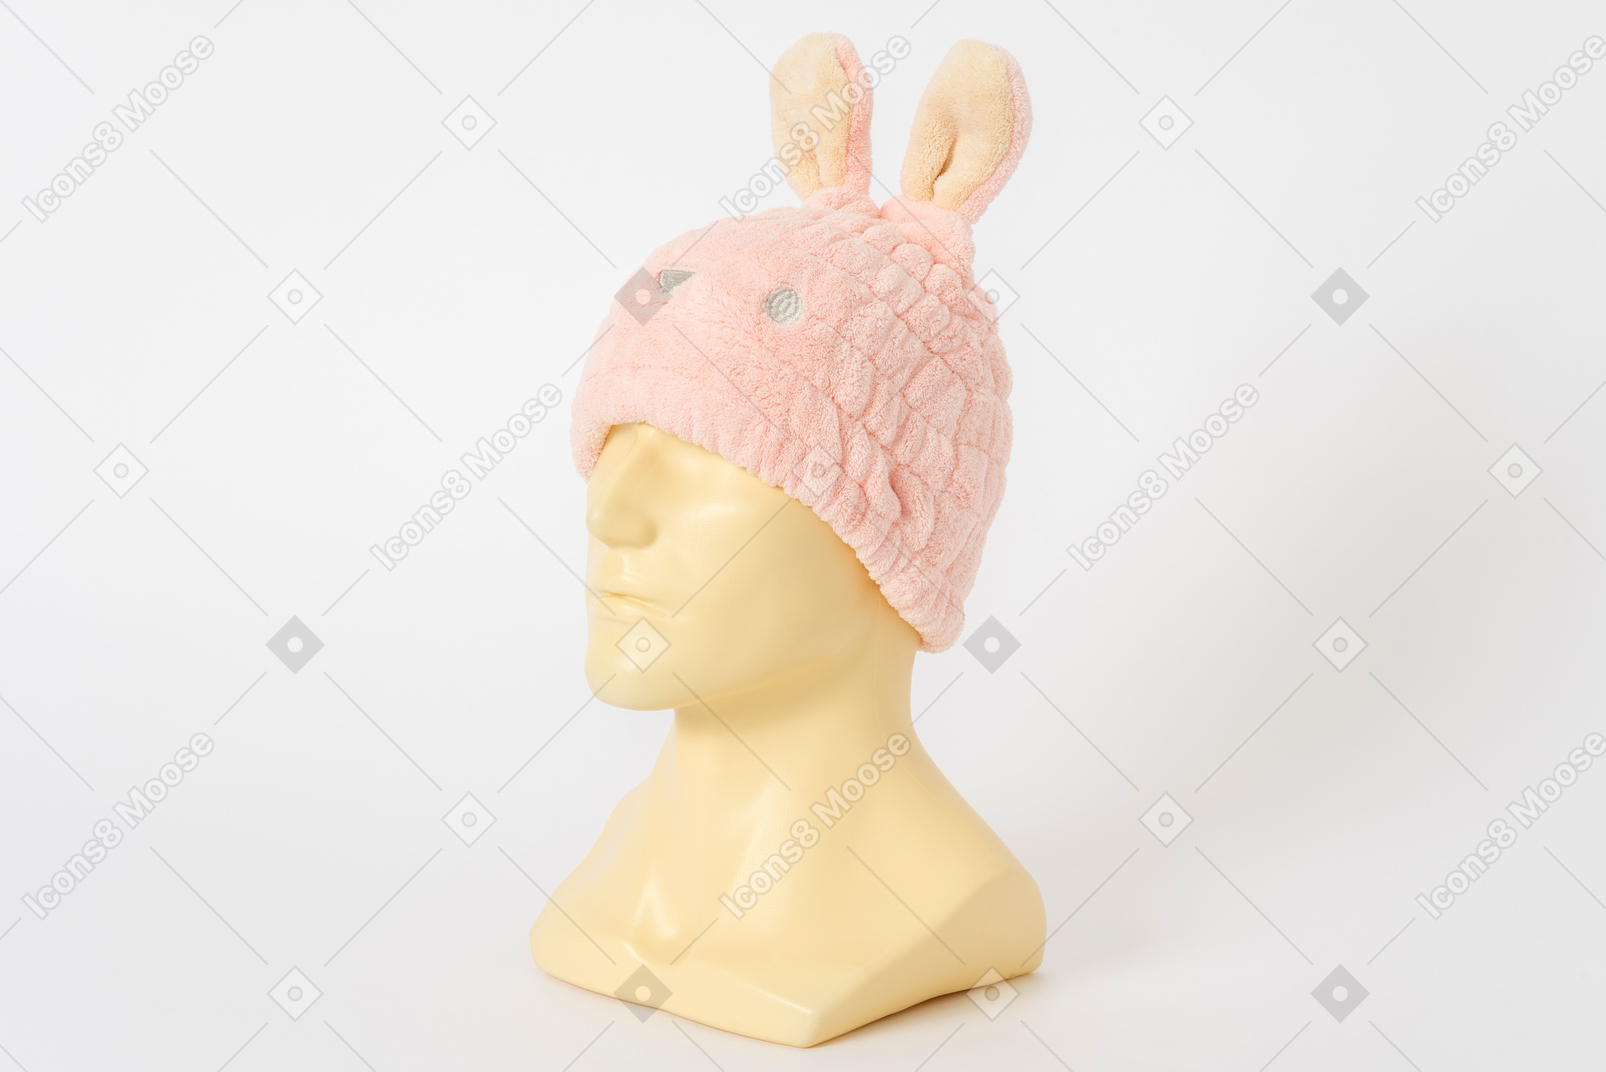 Pink bunny hat on a mannequin head